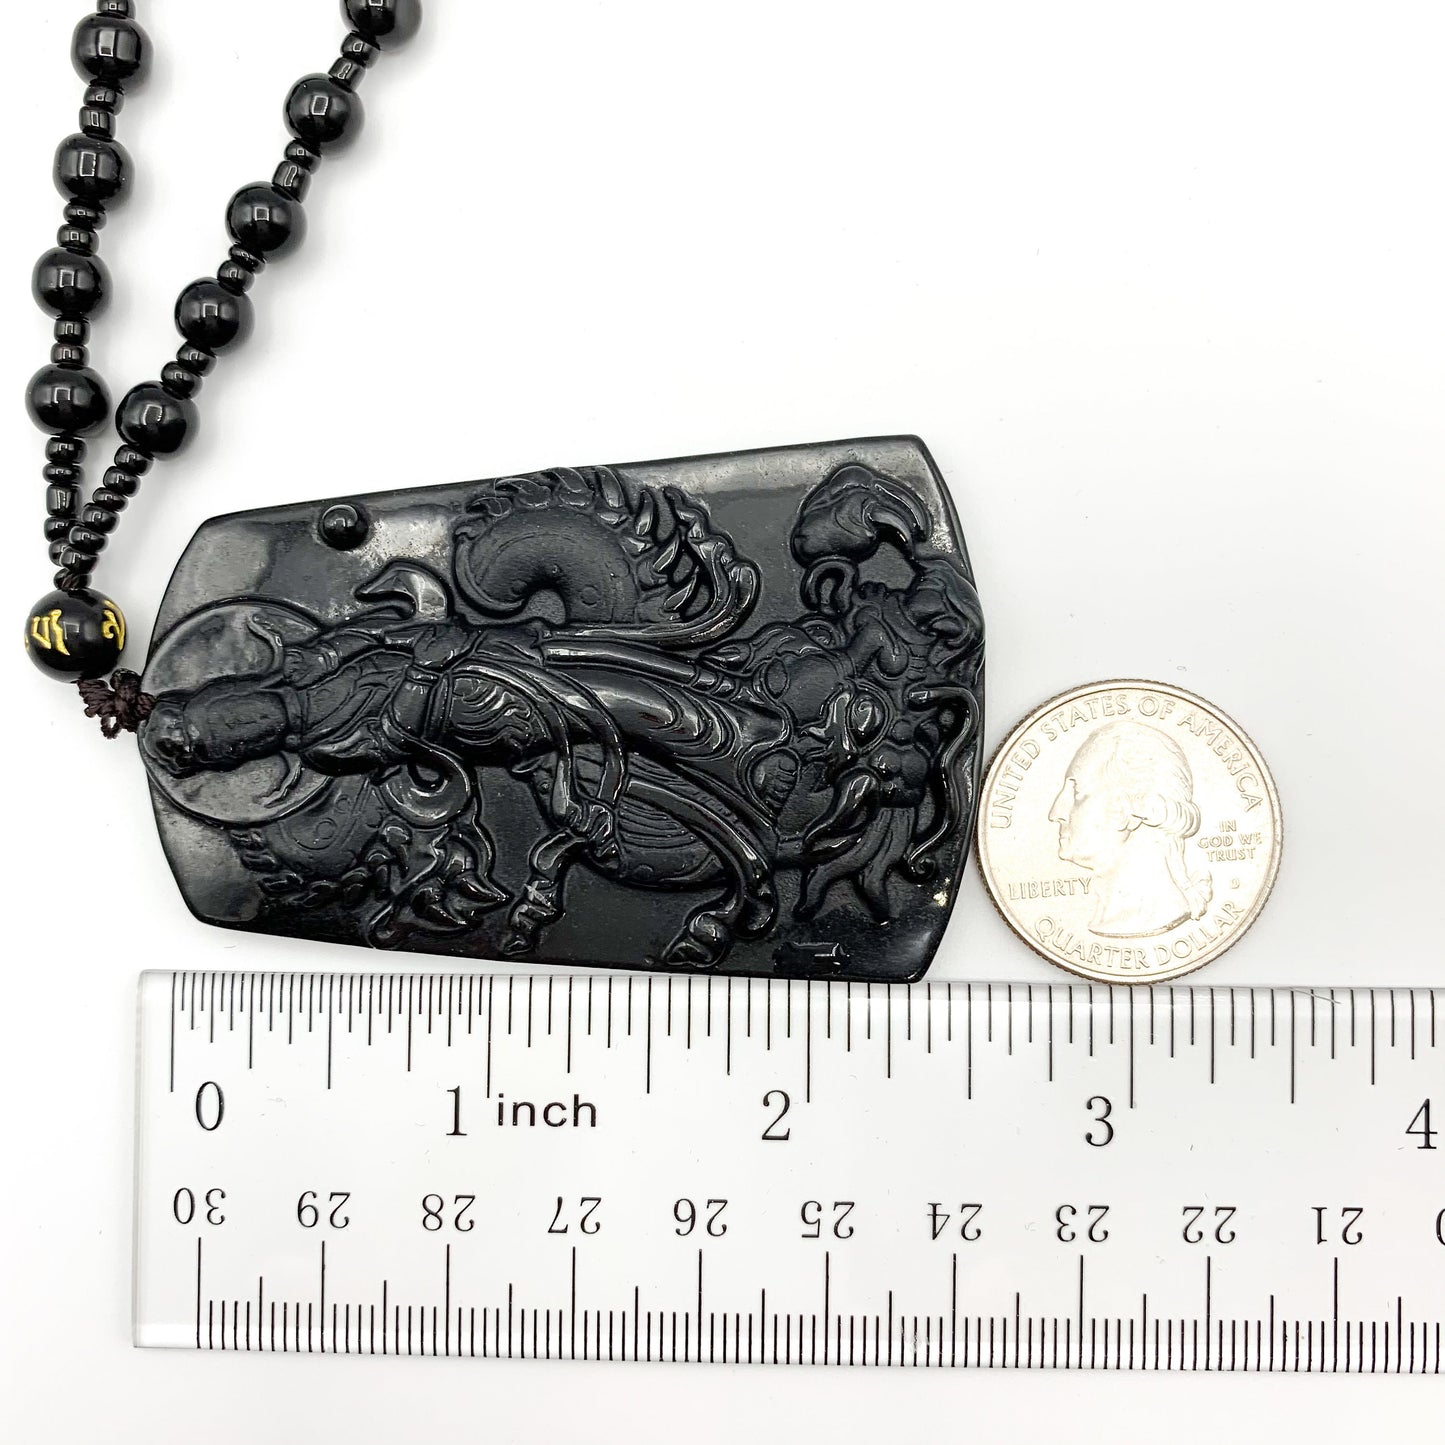 Black Jadeite Jade Omphacite Guan Yin Protected by Dragon Necklace, YJ-0321-0353949 - AriaDesignCollection